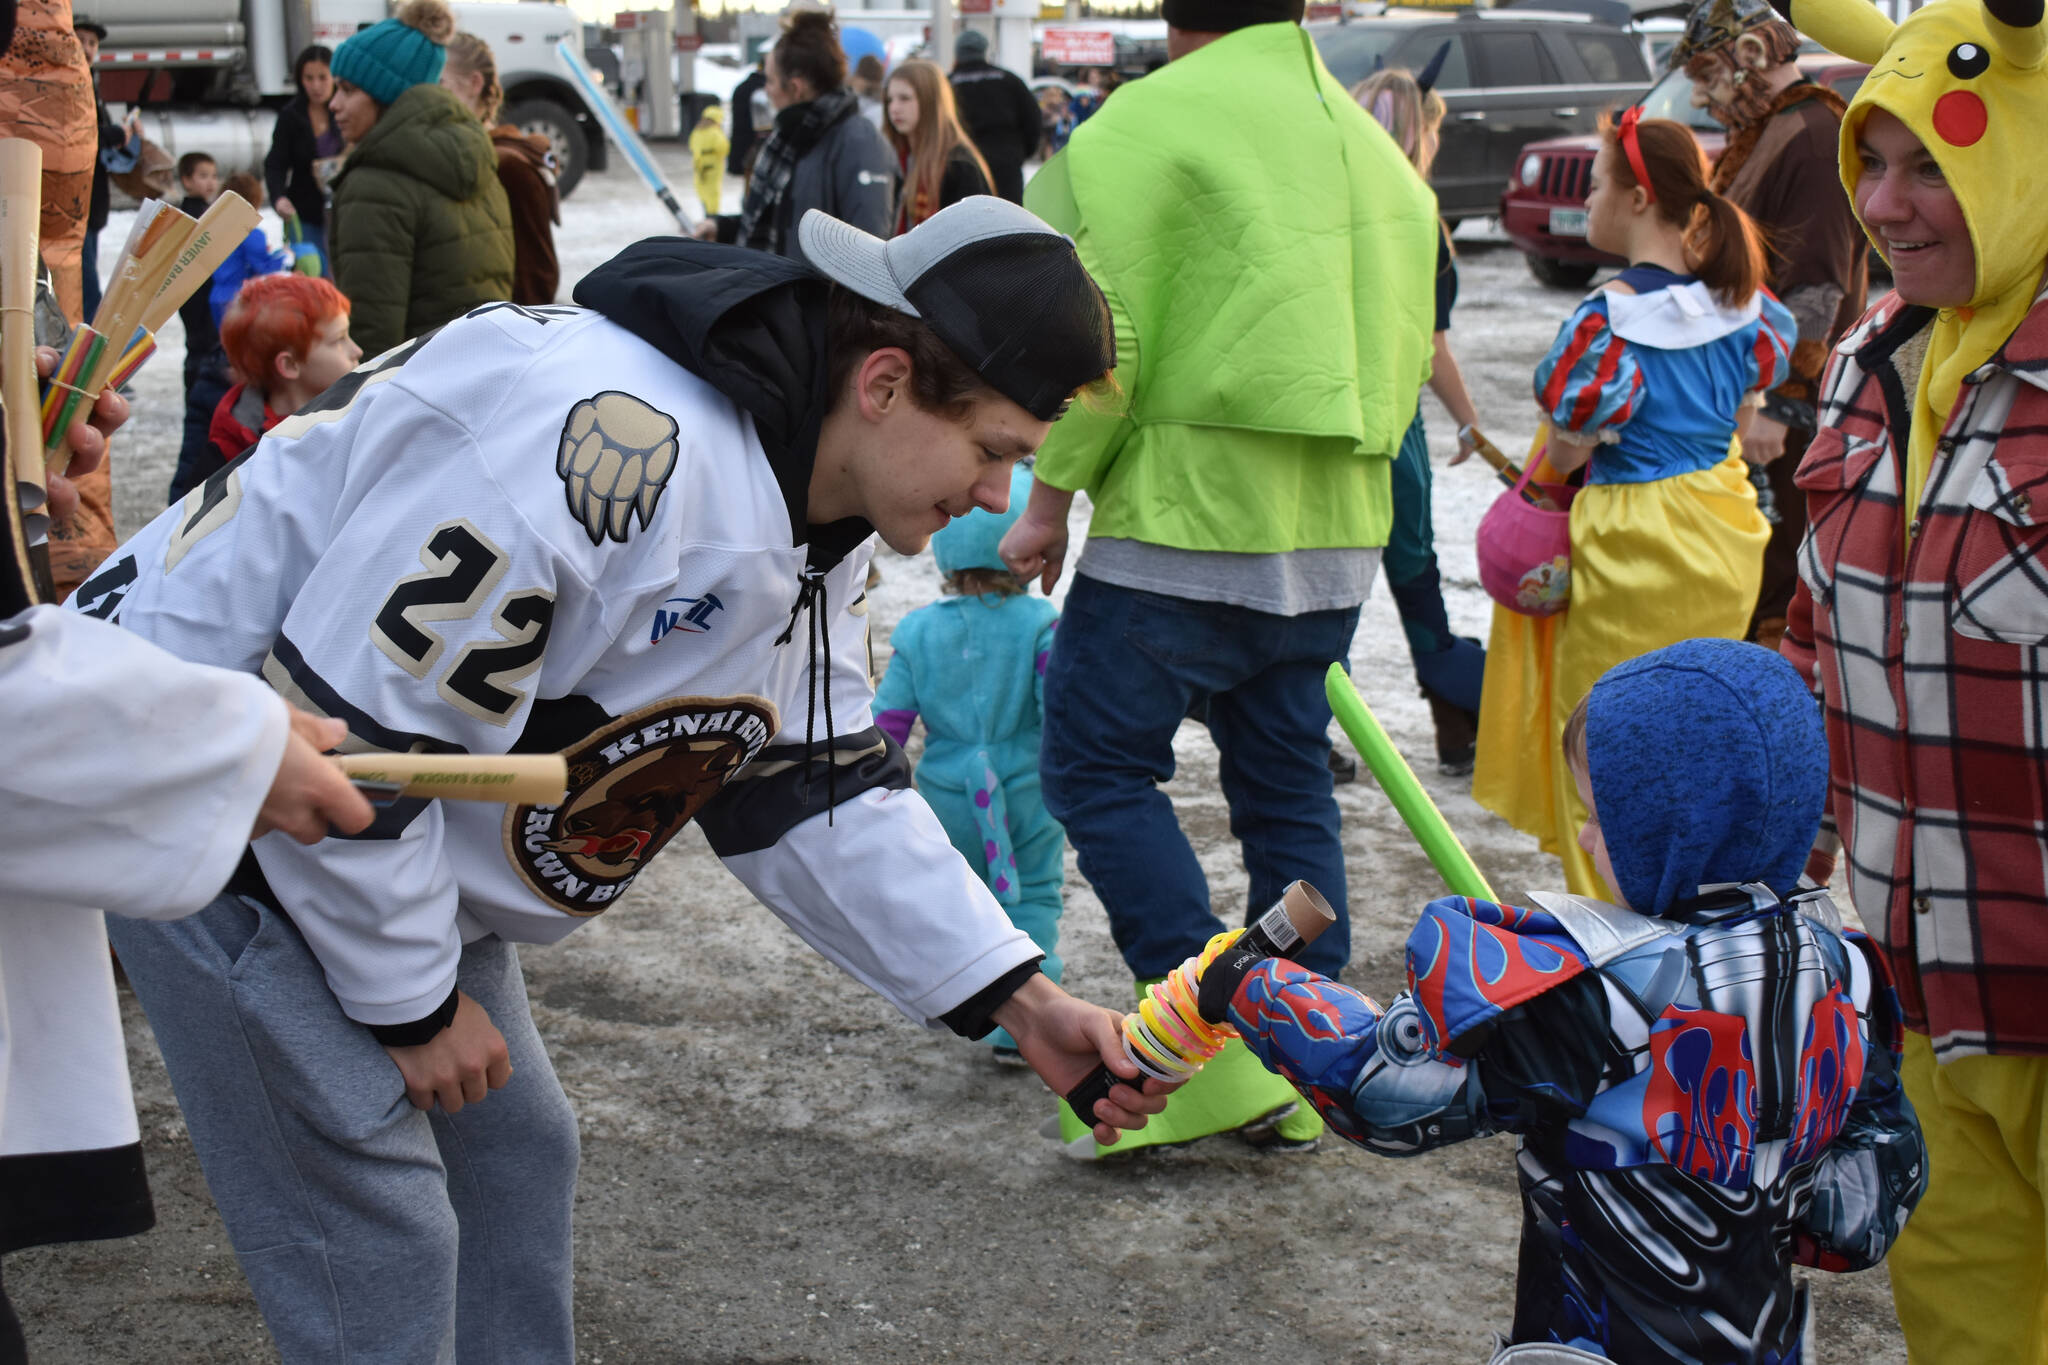 Ashton Christman hands out glow bracelets at the Orca Theater’s Trunk or Treat in Soldotna, Alaska on Monday, Oct. 31, 2022. (Jake Dye/Peninsula Clarion)